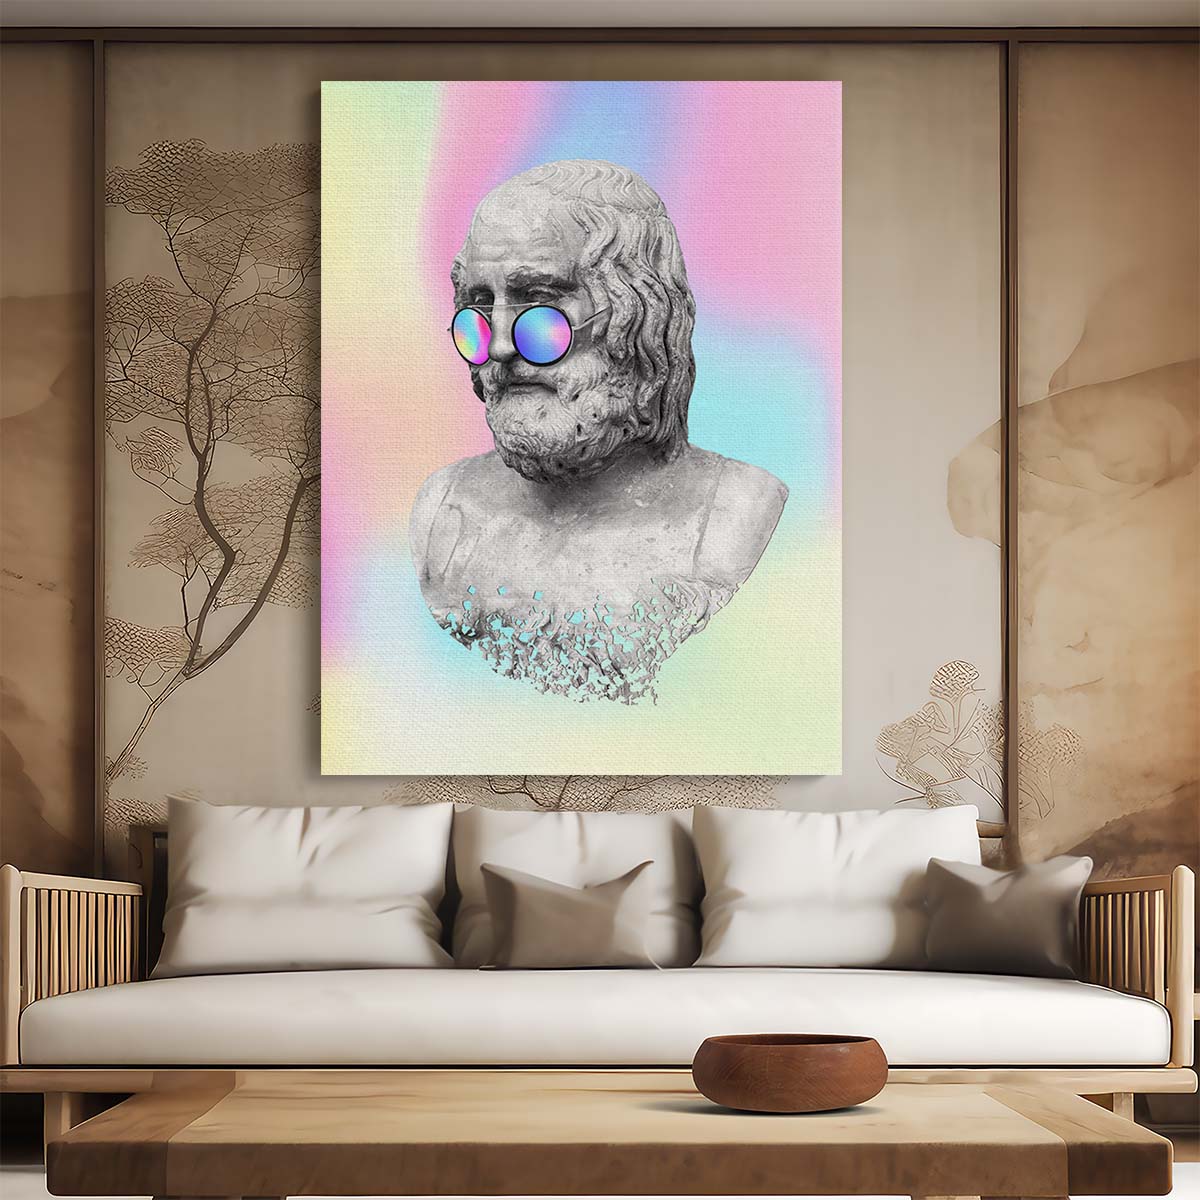 Fadil Roze's Holo-3D Greek Statue Illustration Vintage Neo-Renaissance Art by Luxuriance Designs, made in USA